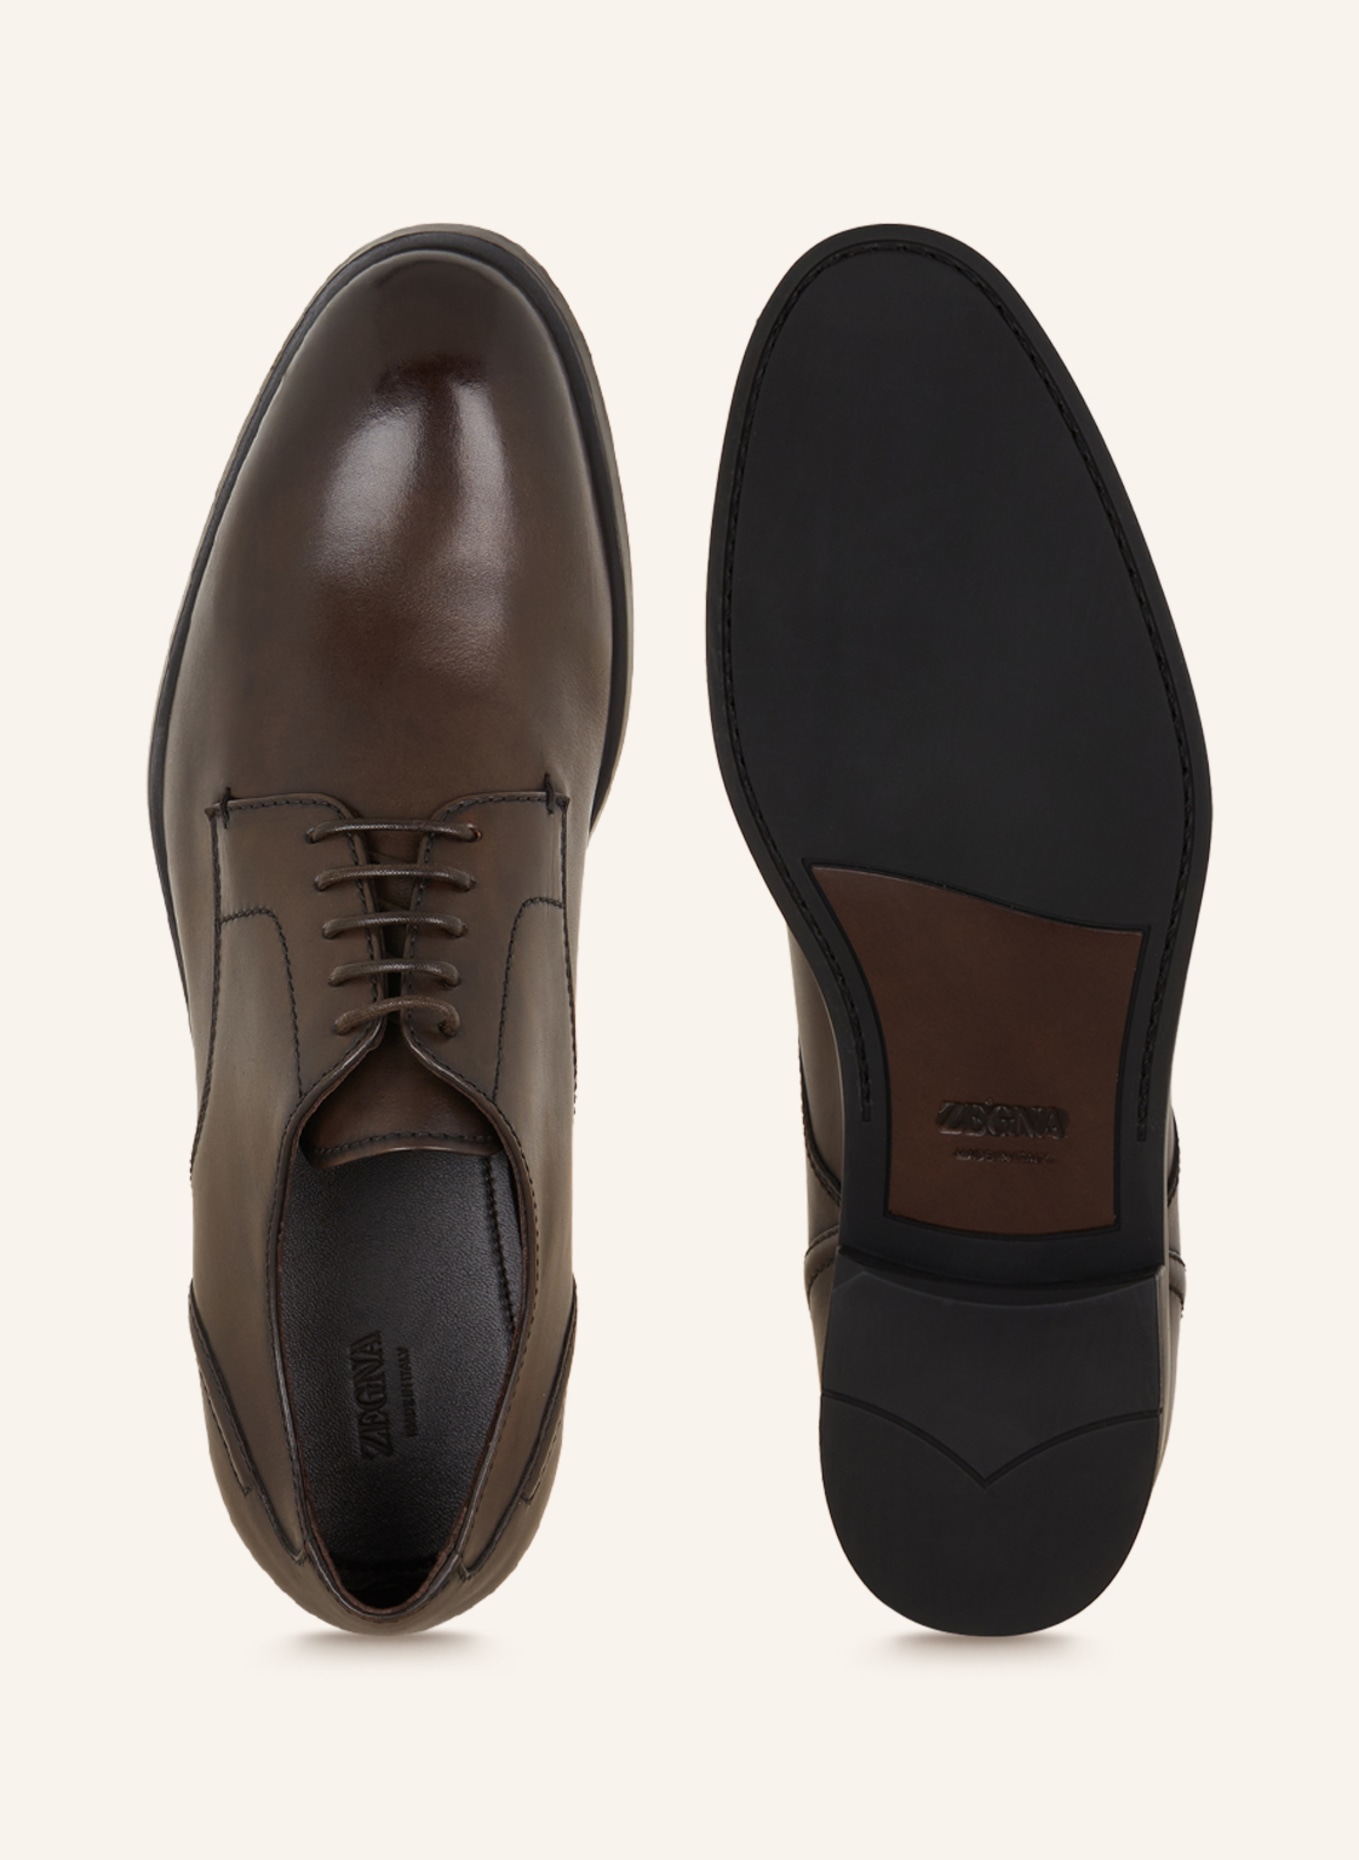 ZEGNA Lace-up shoes SIENA, Color: DARK BROWN (Image 5)